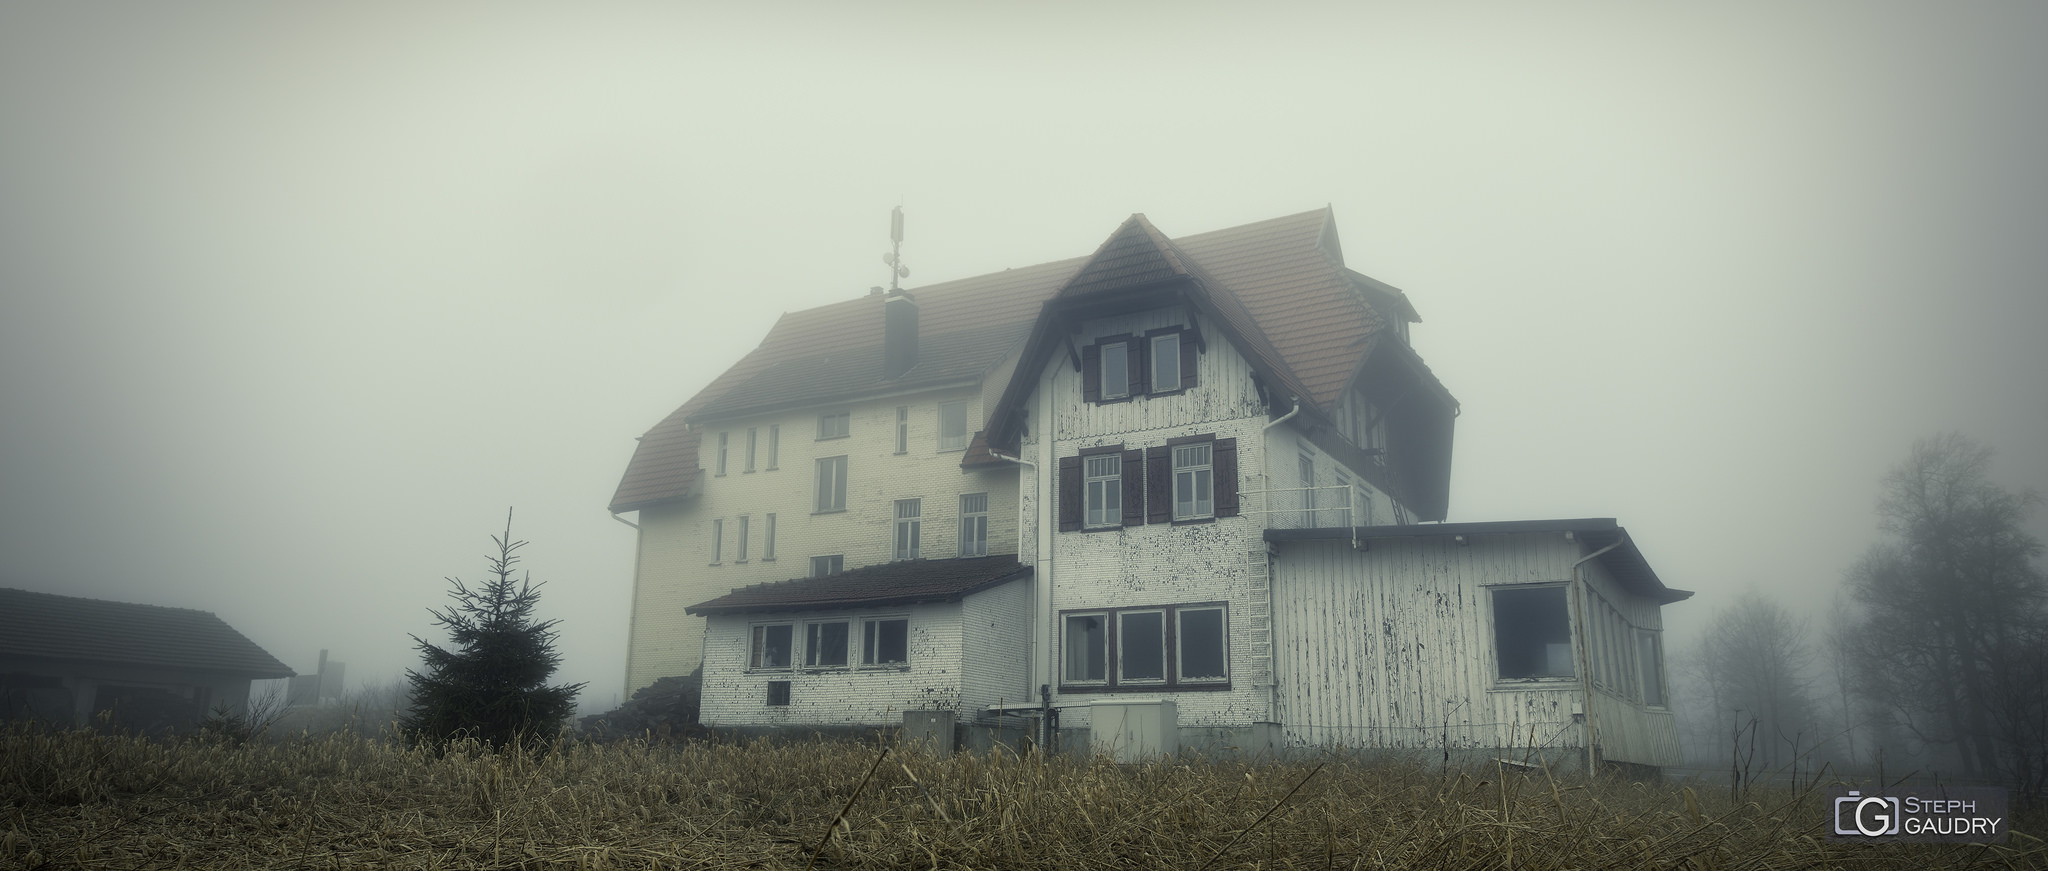 Lost city / Haunted house in the mist